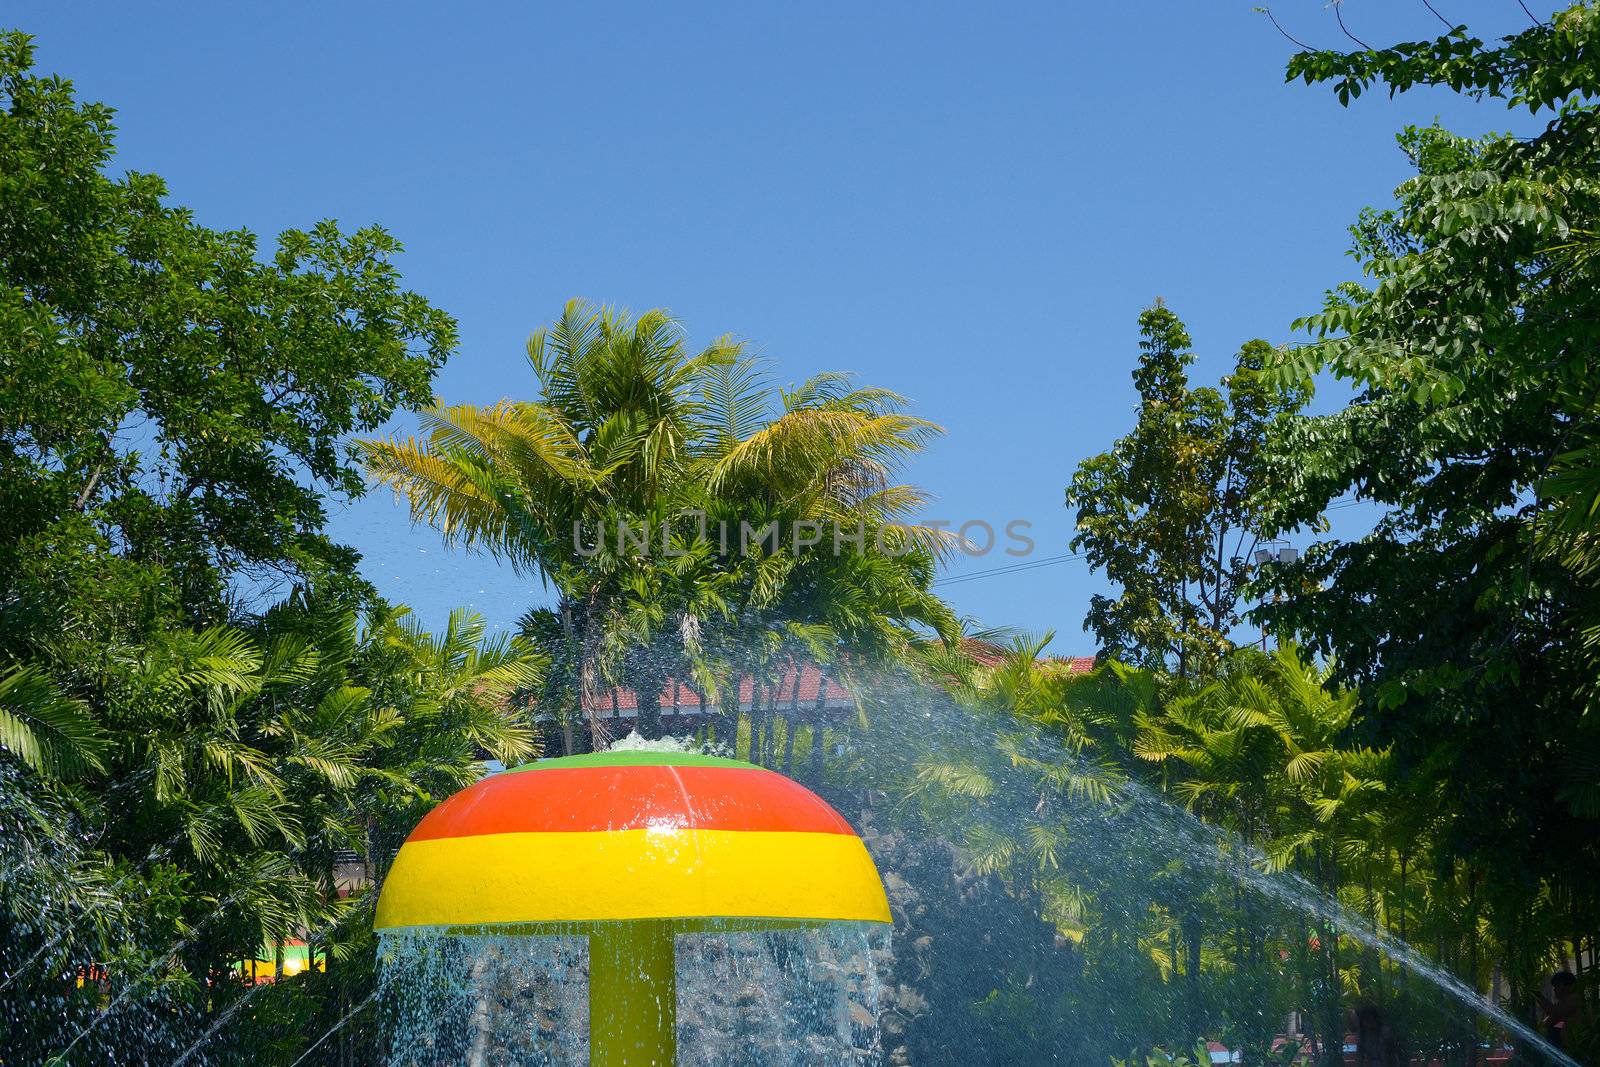 pool fountain with umbrella structure against trees and blue sky. 